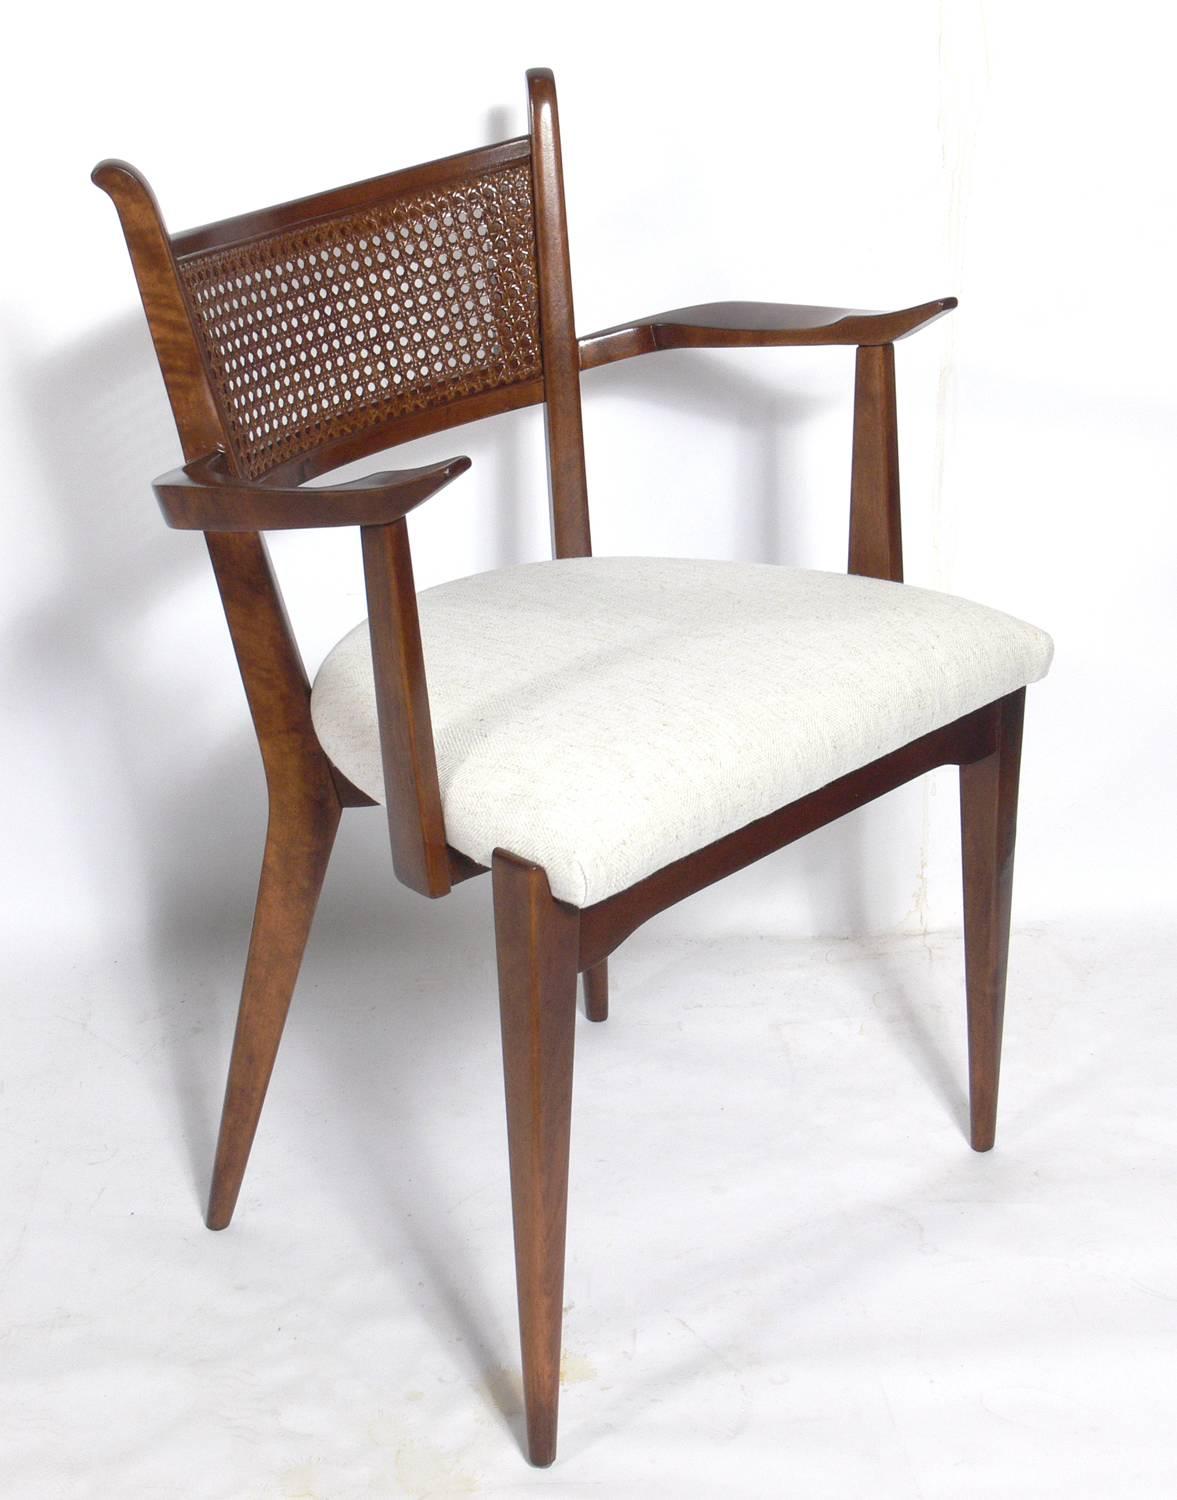 Mid-20th Century Edmund Spence Desk and Chair 